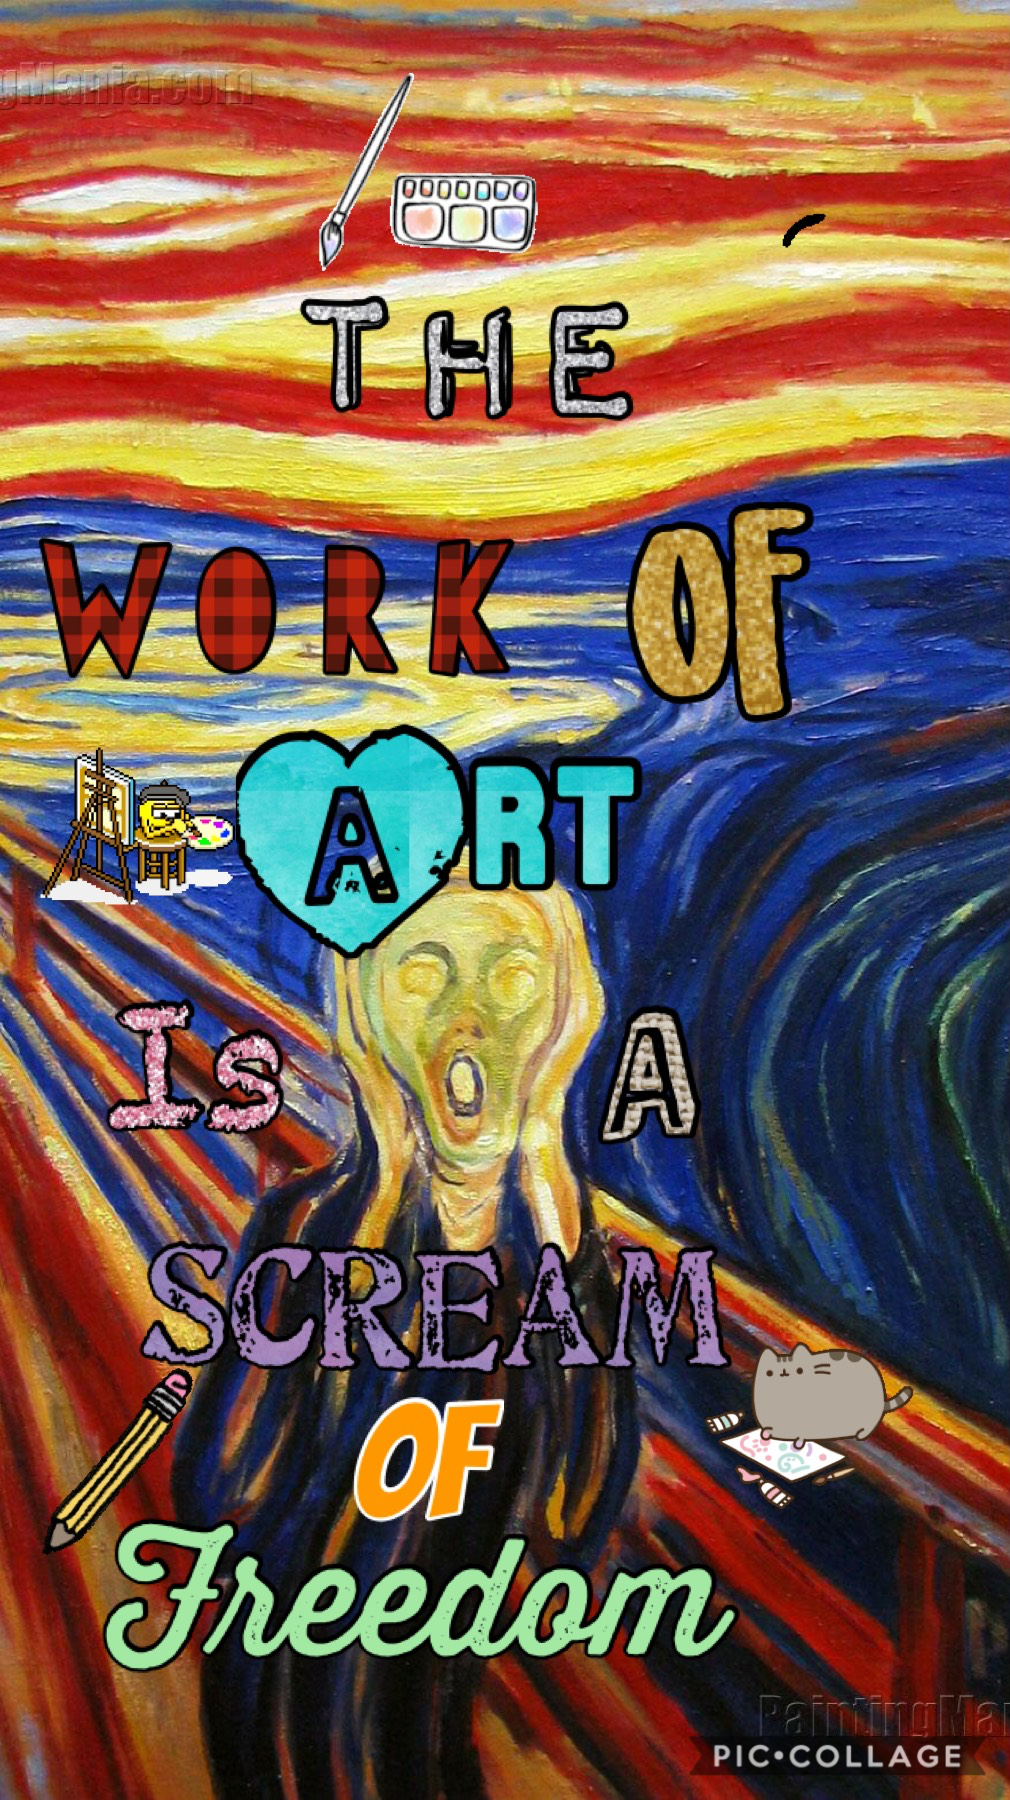 The work of art is a scream of freedom 